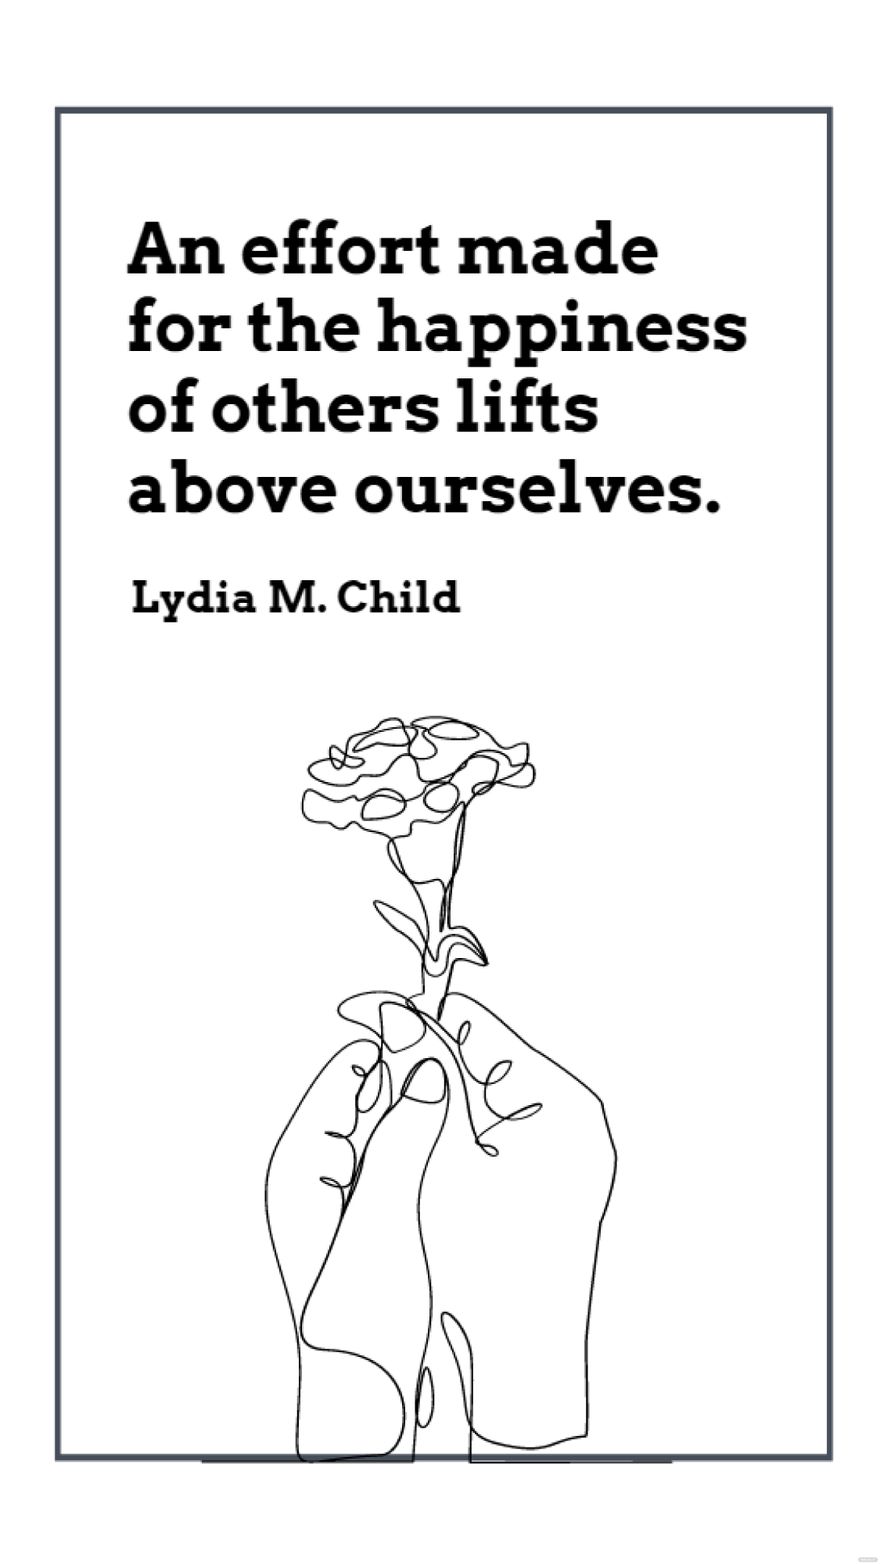 Lydia M. Child - An effort made for the happiness of others lifts above ourselves.